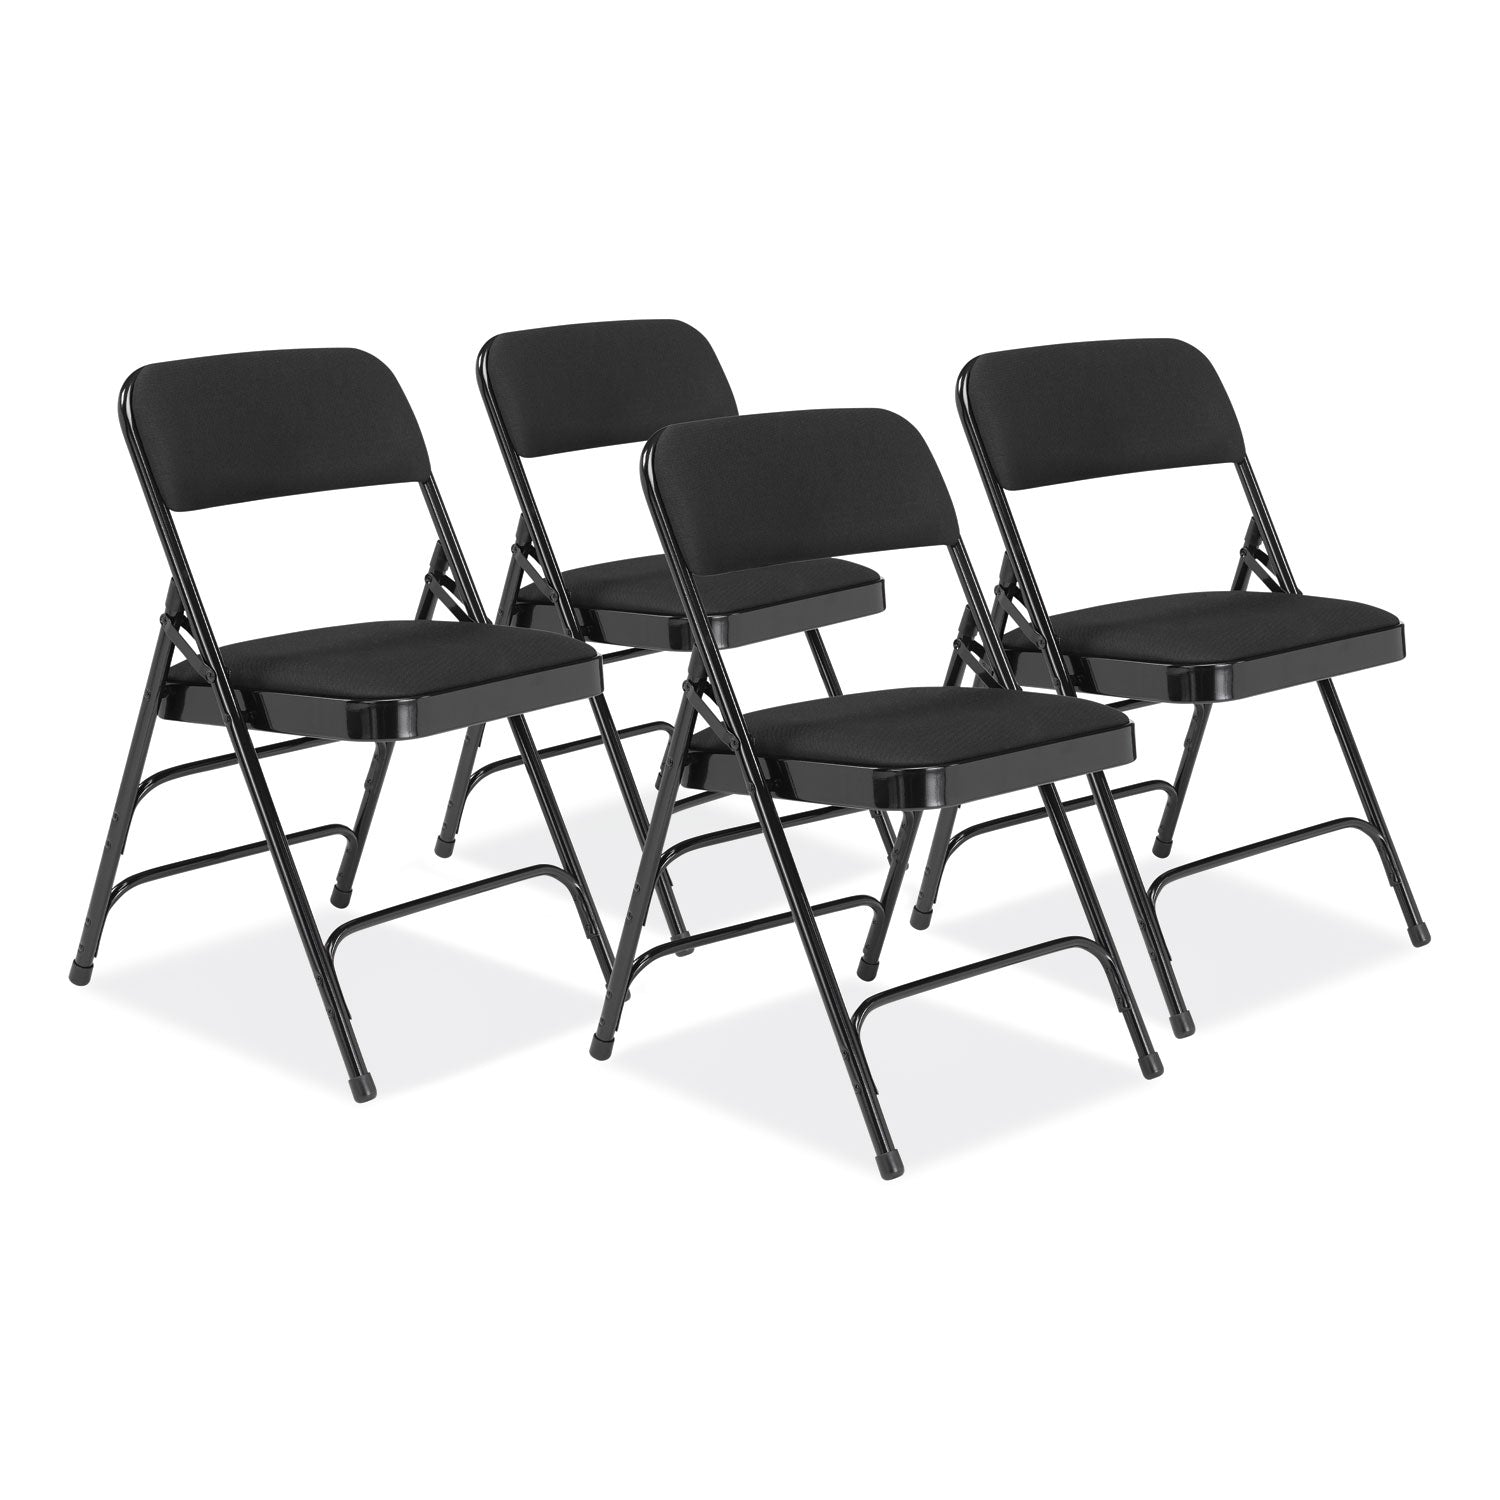 2300-series-fabric-upholstered-triple-brace-premium-folding-chair-supports-500lb-midnight-black-4-ctships-in-1-3-bus-days_nps2310 - 1